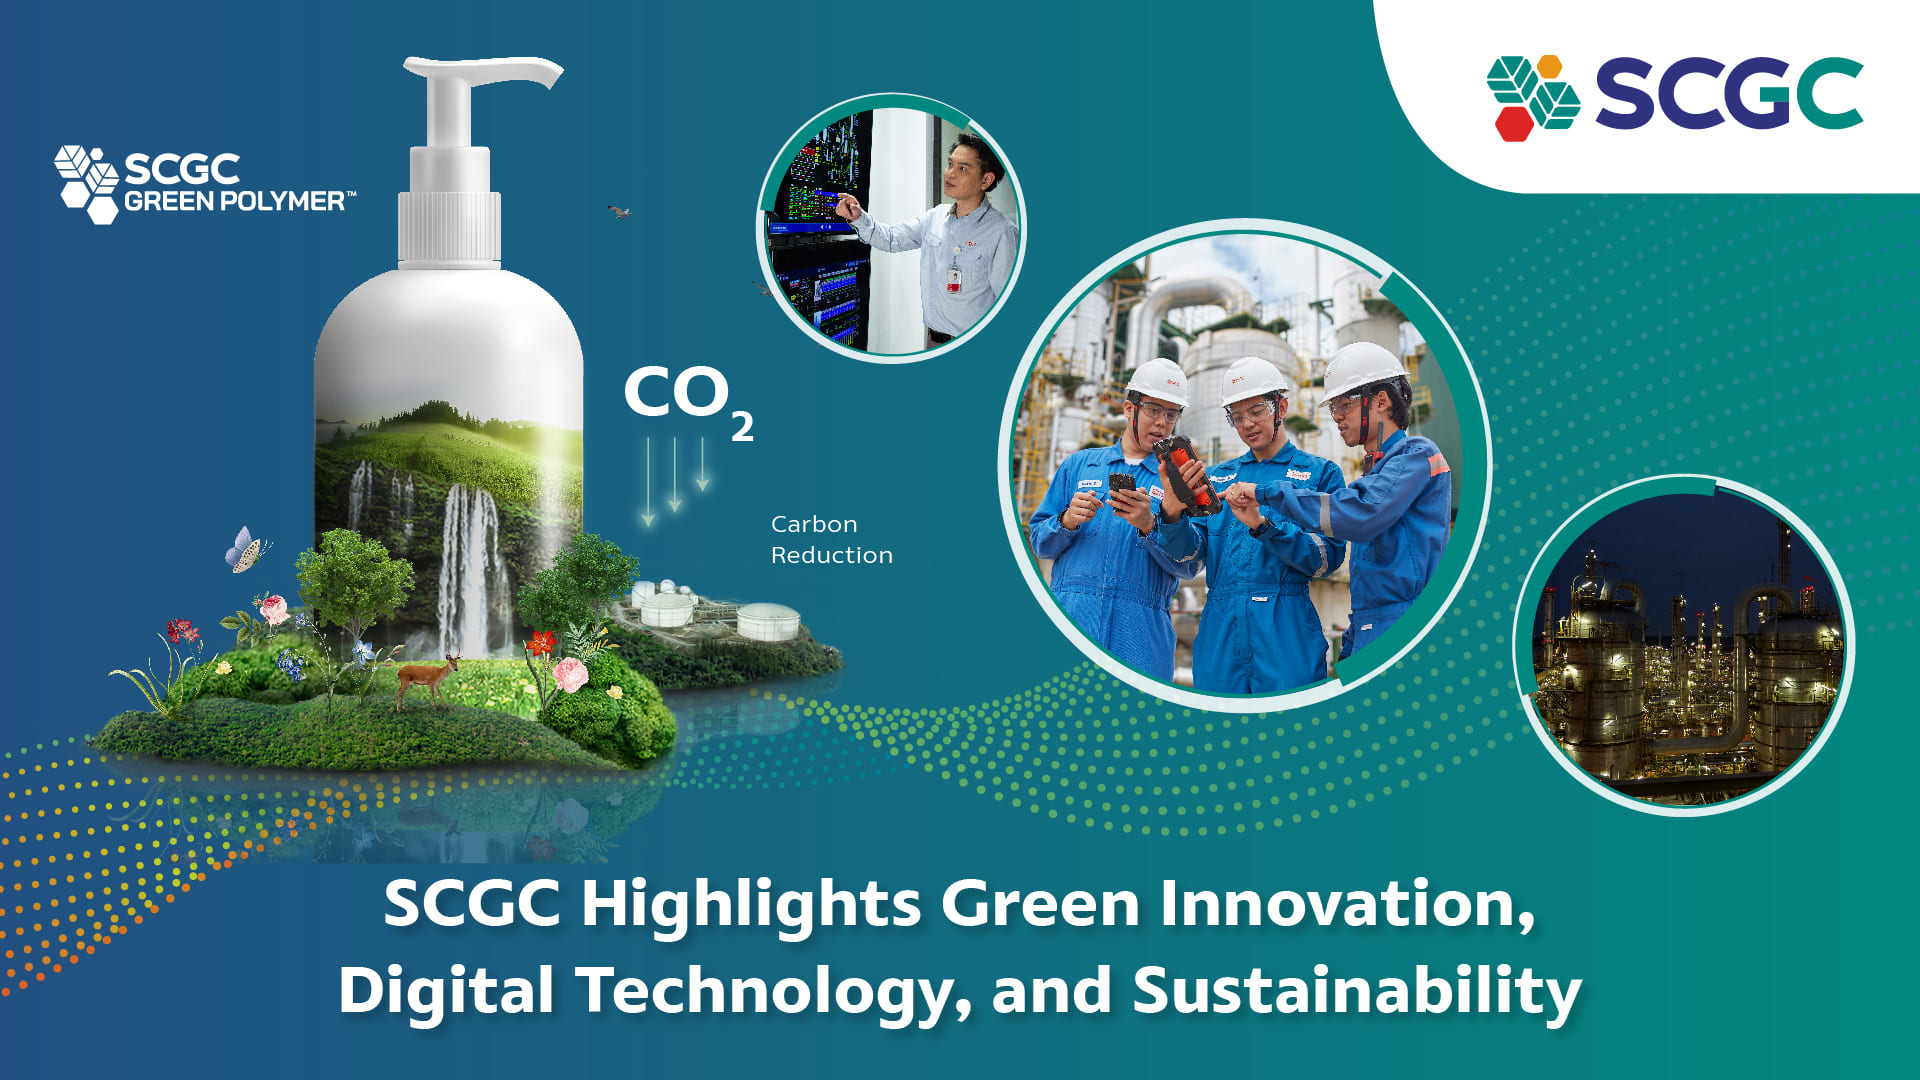 Chemical Innovation Leader SCGC Highlights Green Innovation, Digital Technology, and Sustainability